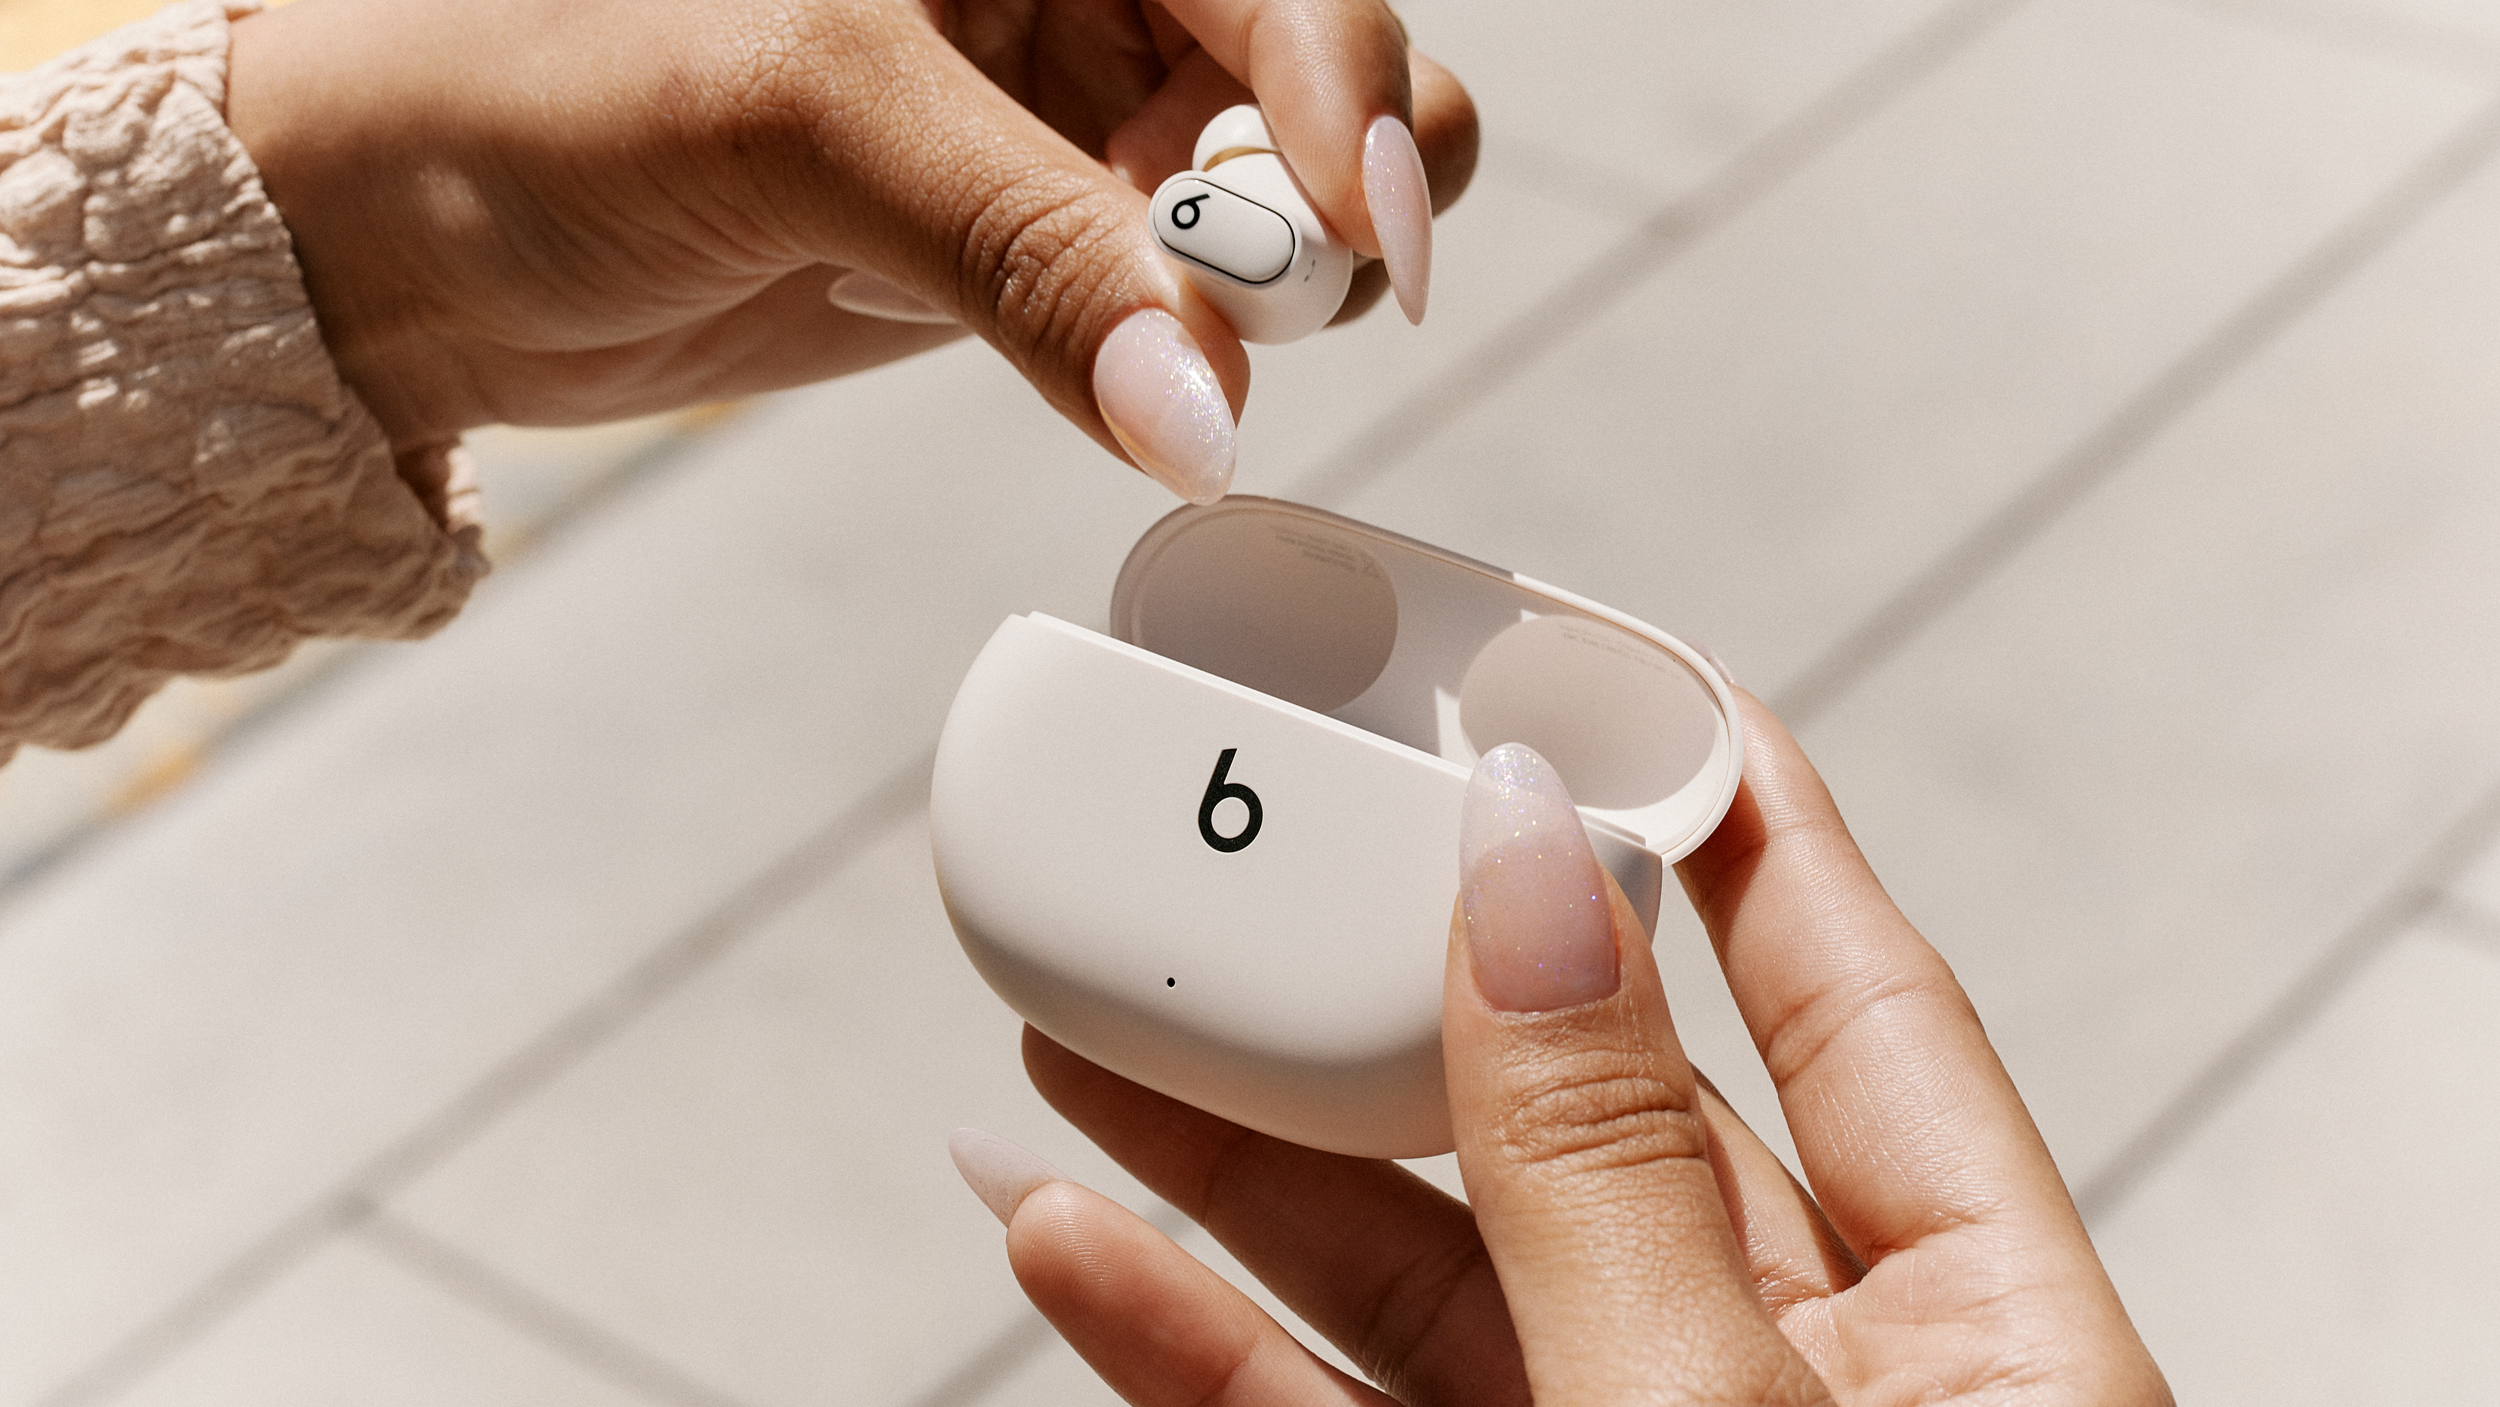 Beats Studio Buds + Offer Improved Call and ANC Performance